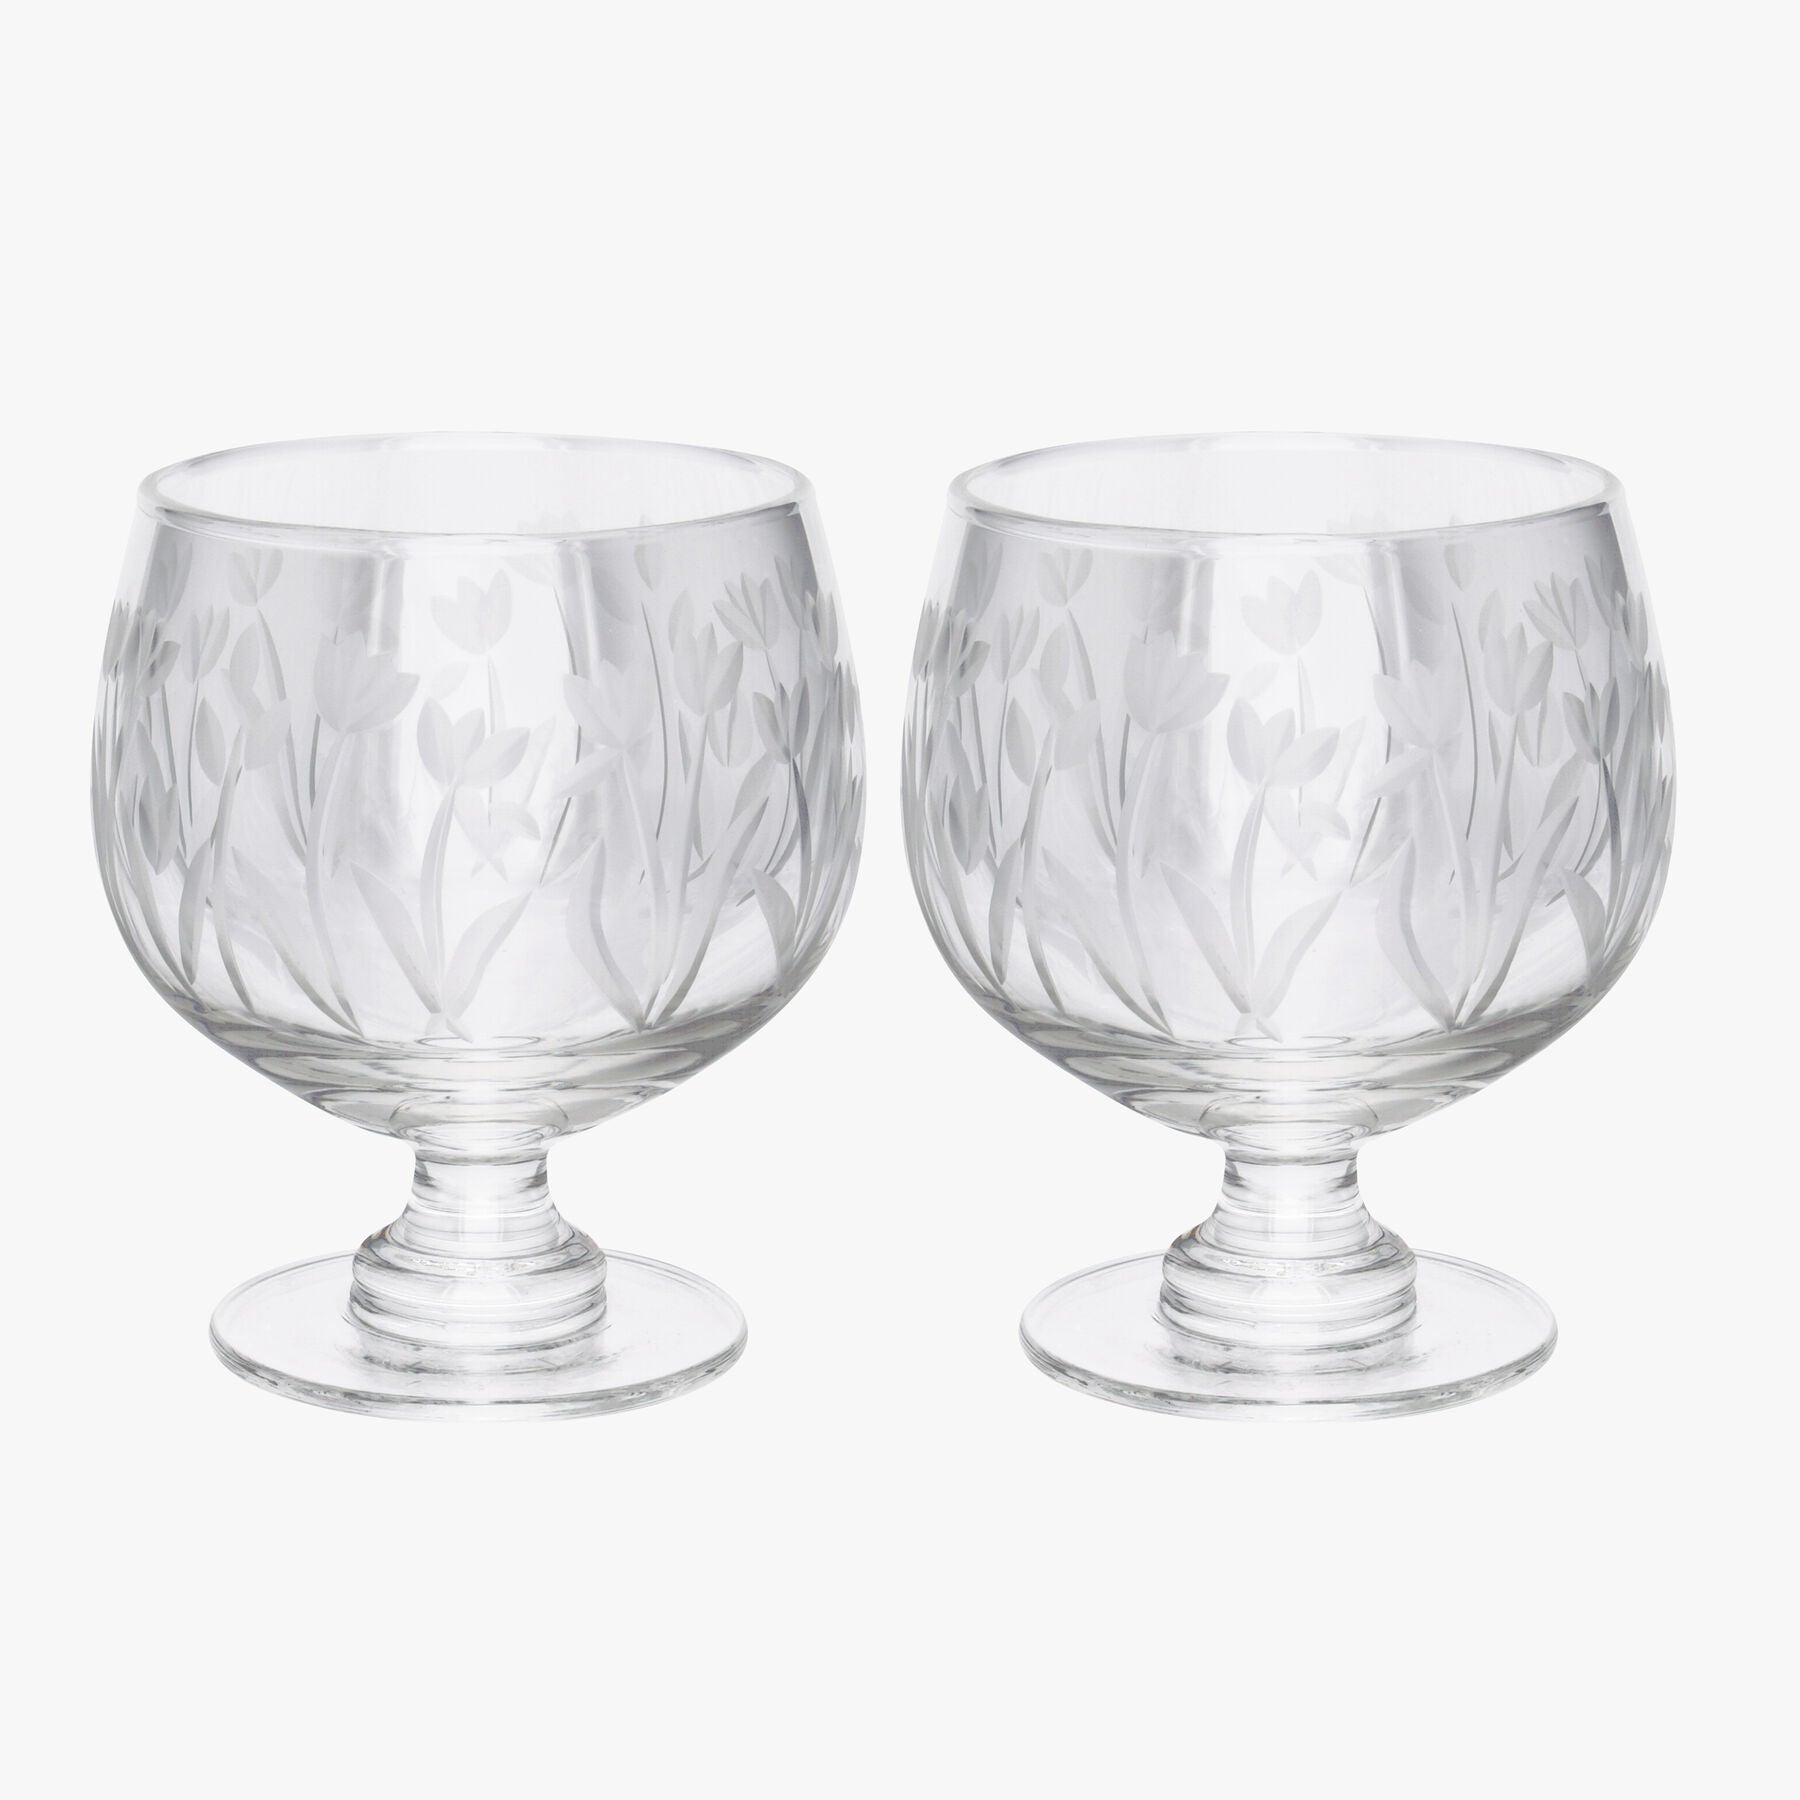 Emma Bridgewater |  Golden Tulips Set Of 2 Gin Glasses - Unique Hand-Etched Piece Glass